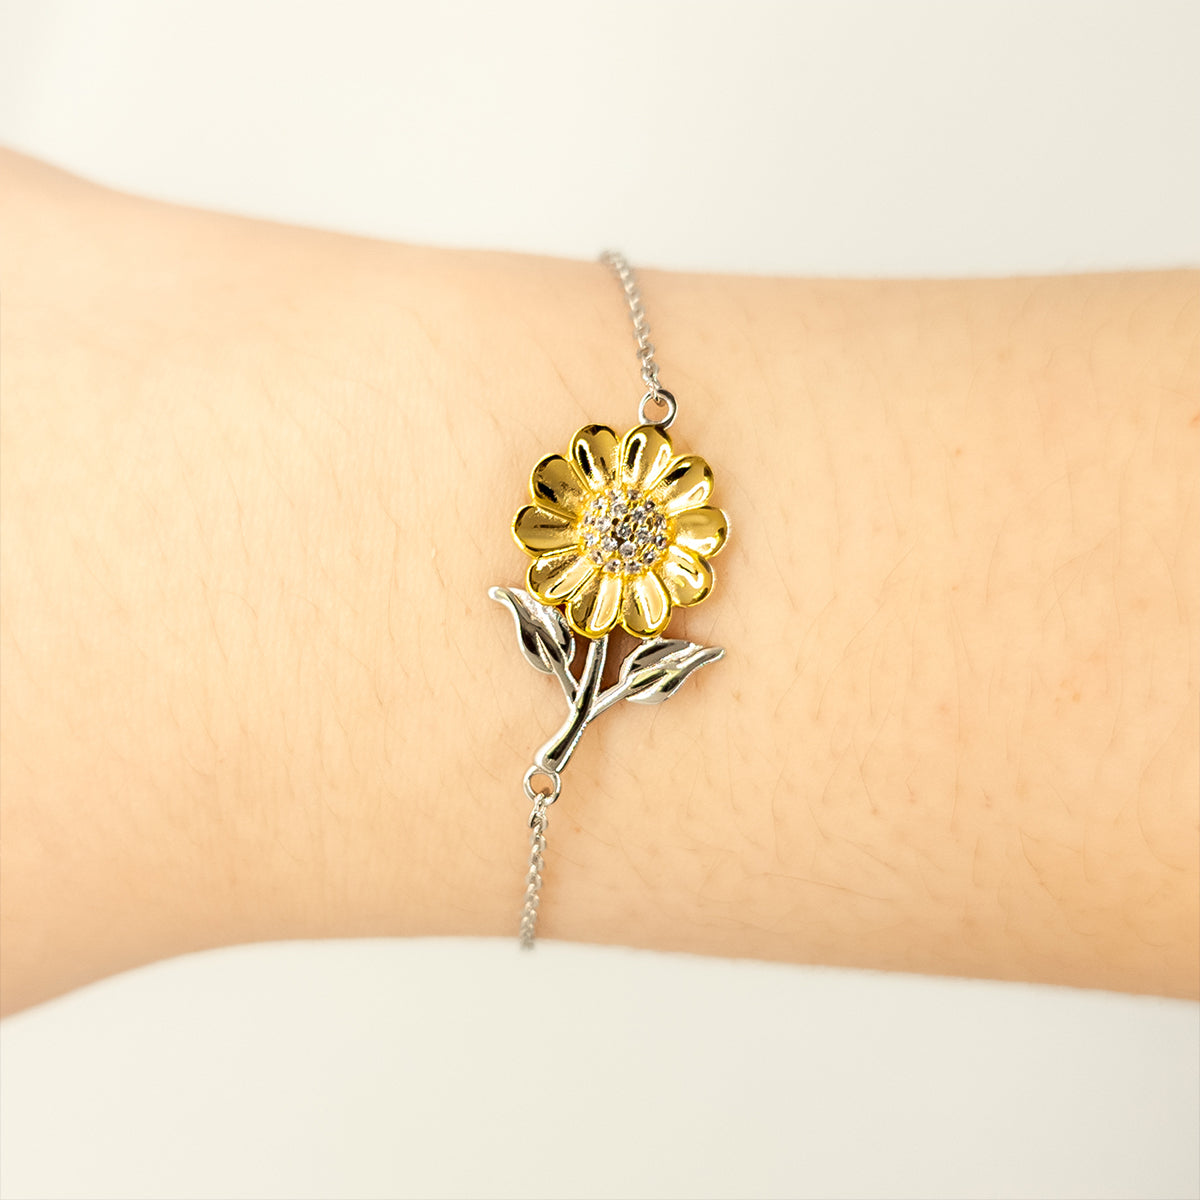 Fathers Day Sunflower Bracelet Engraved with Youll Always Have a Special Place in My Heart Unique Gift for Dad on Birthday or Holidays